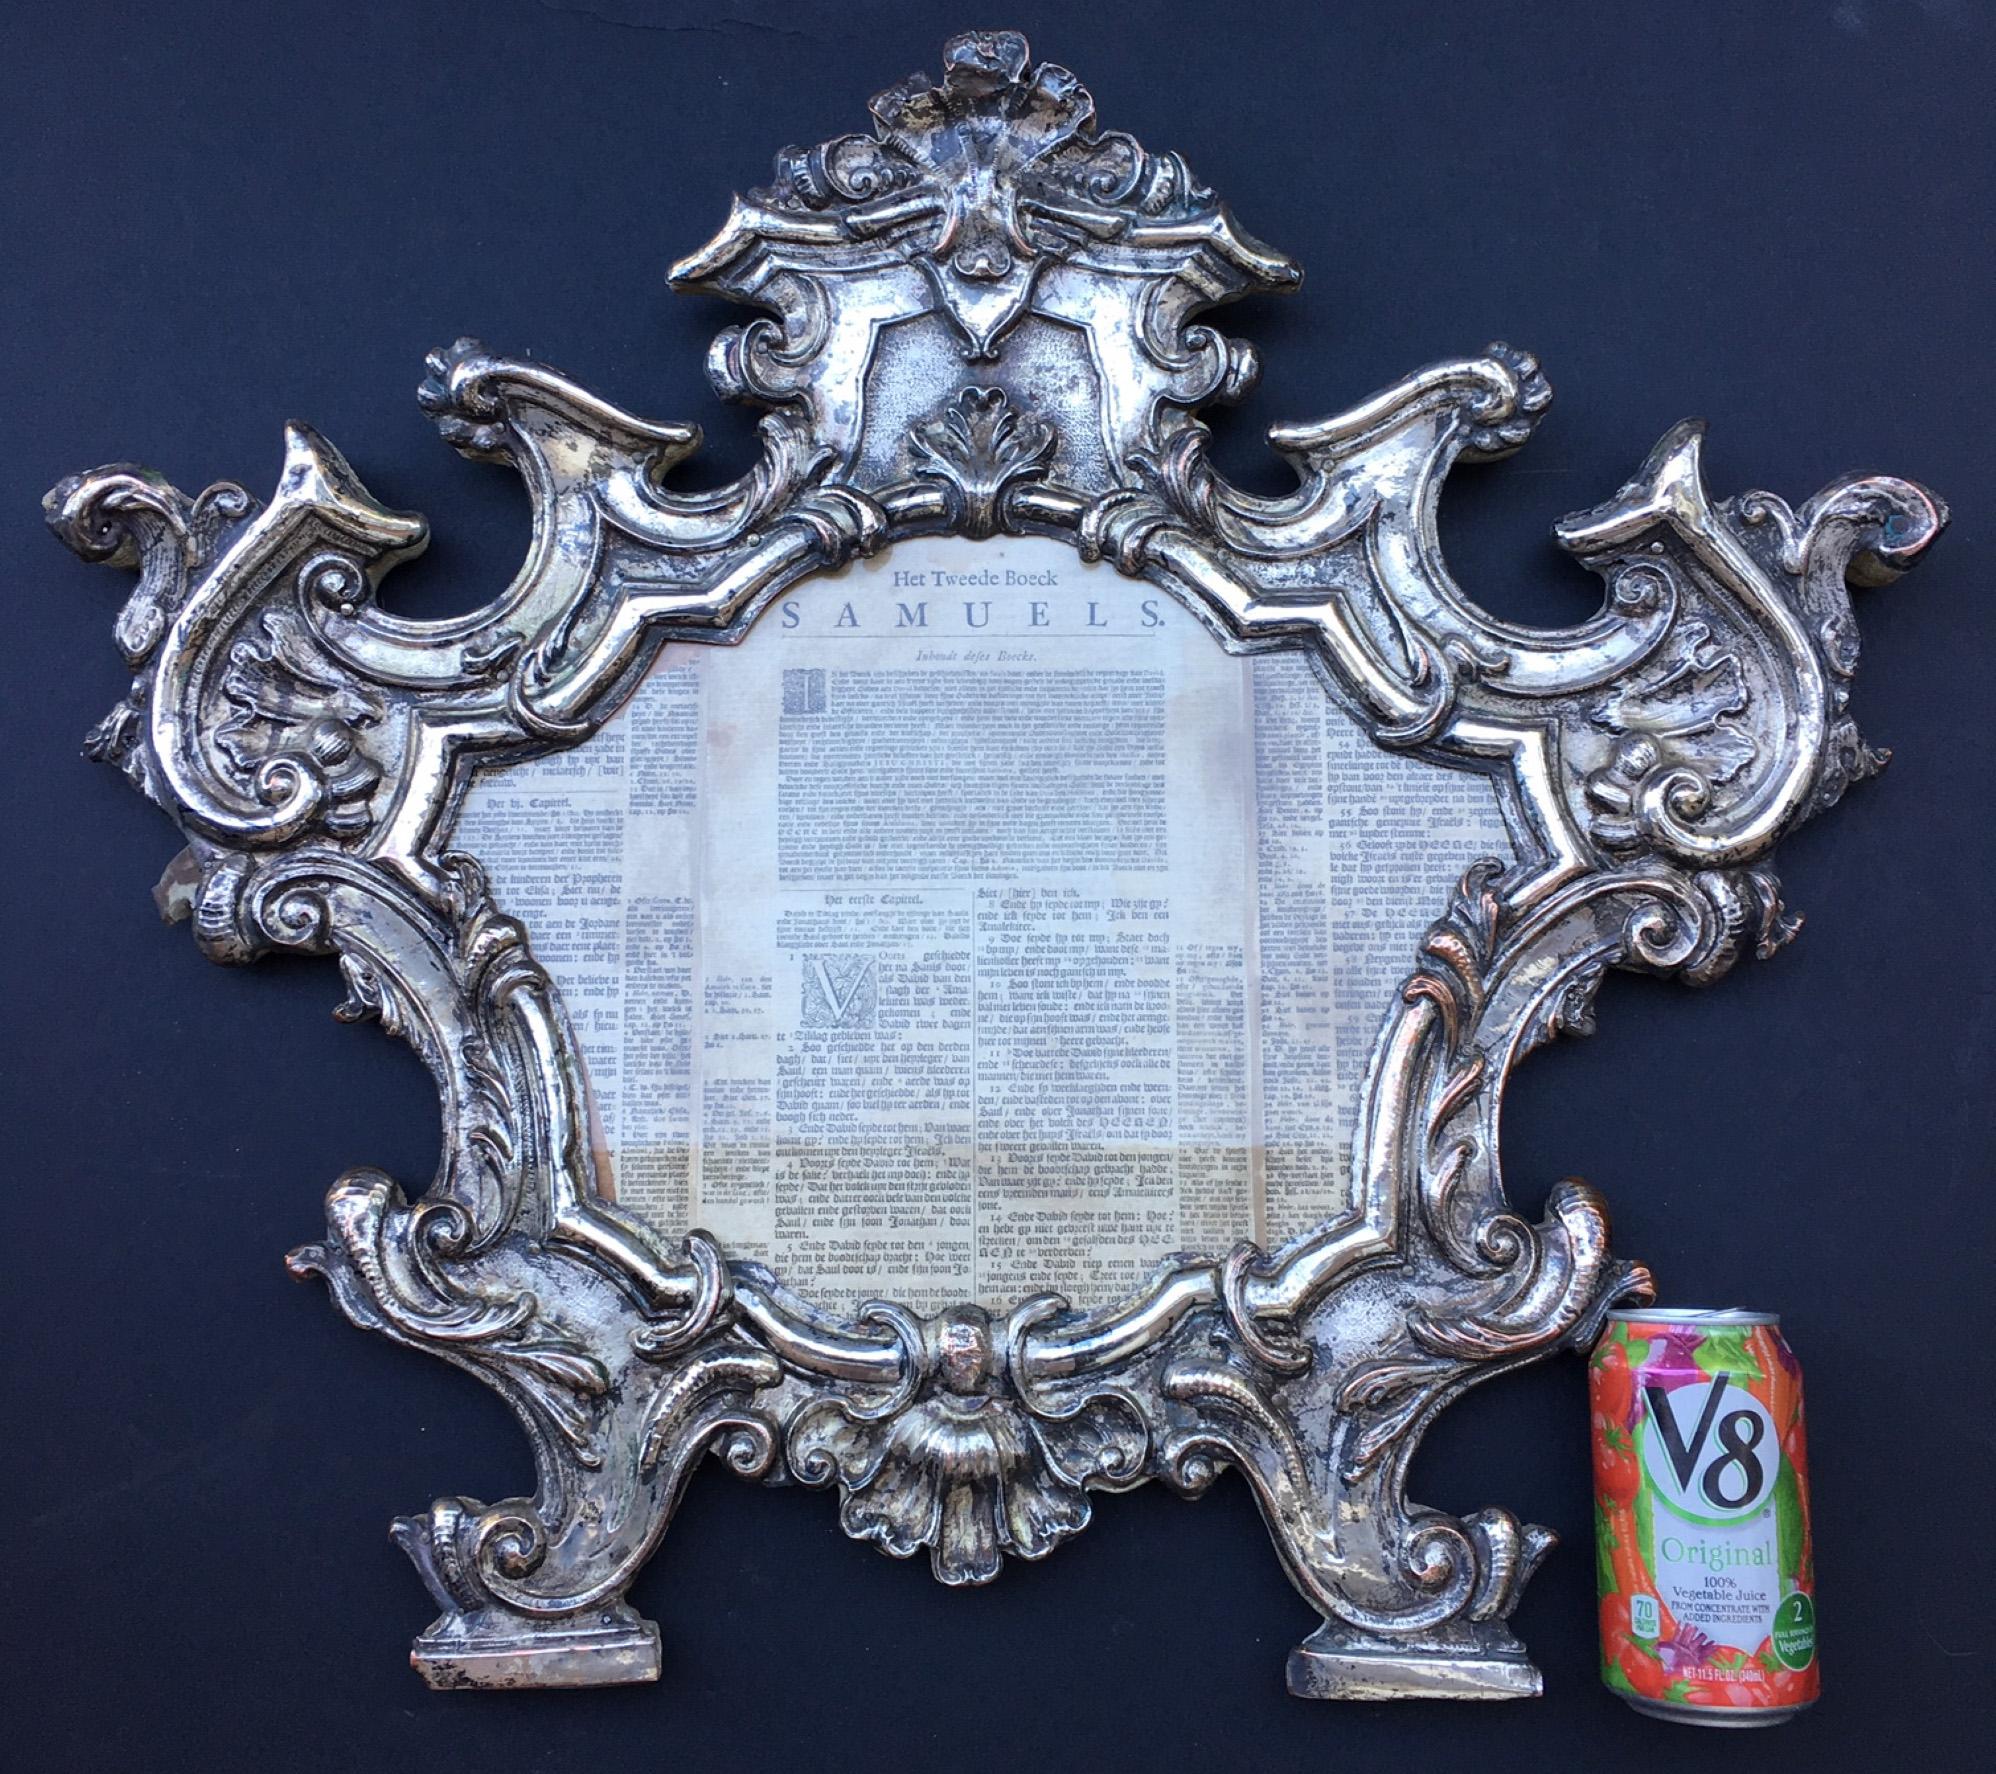 This original 18th century frame is silver gilded over copper. It is elaborately embossed and chiseled. The cartouche is surrounded by rocaille and volute motifs. The Carta is mounted on a wood backing and rests on two linear bases. The silver is